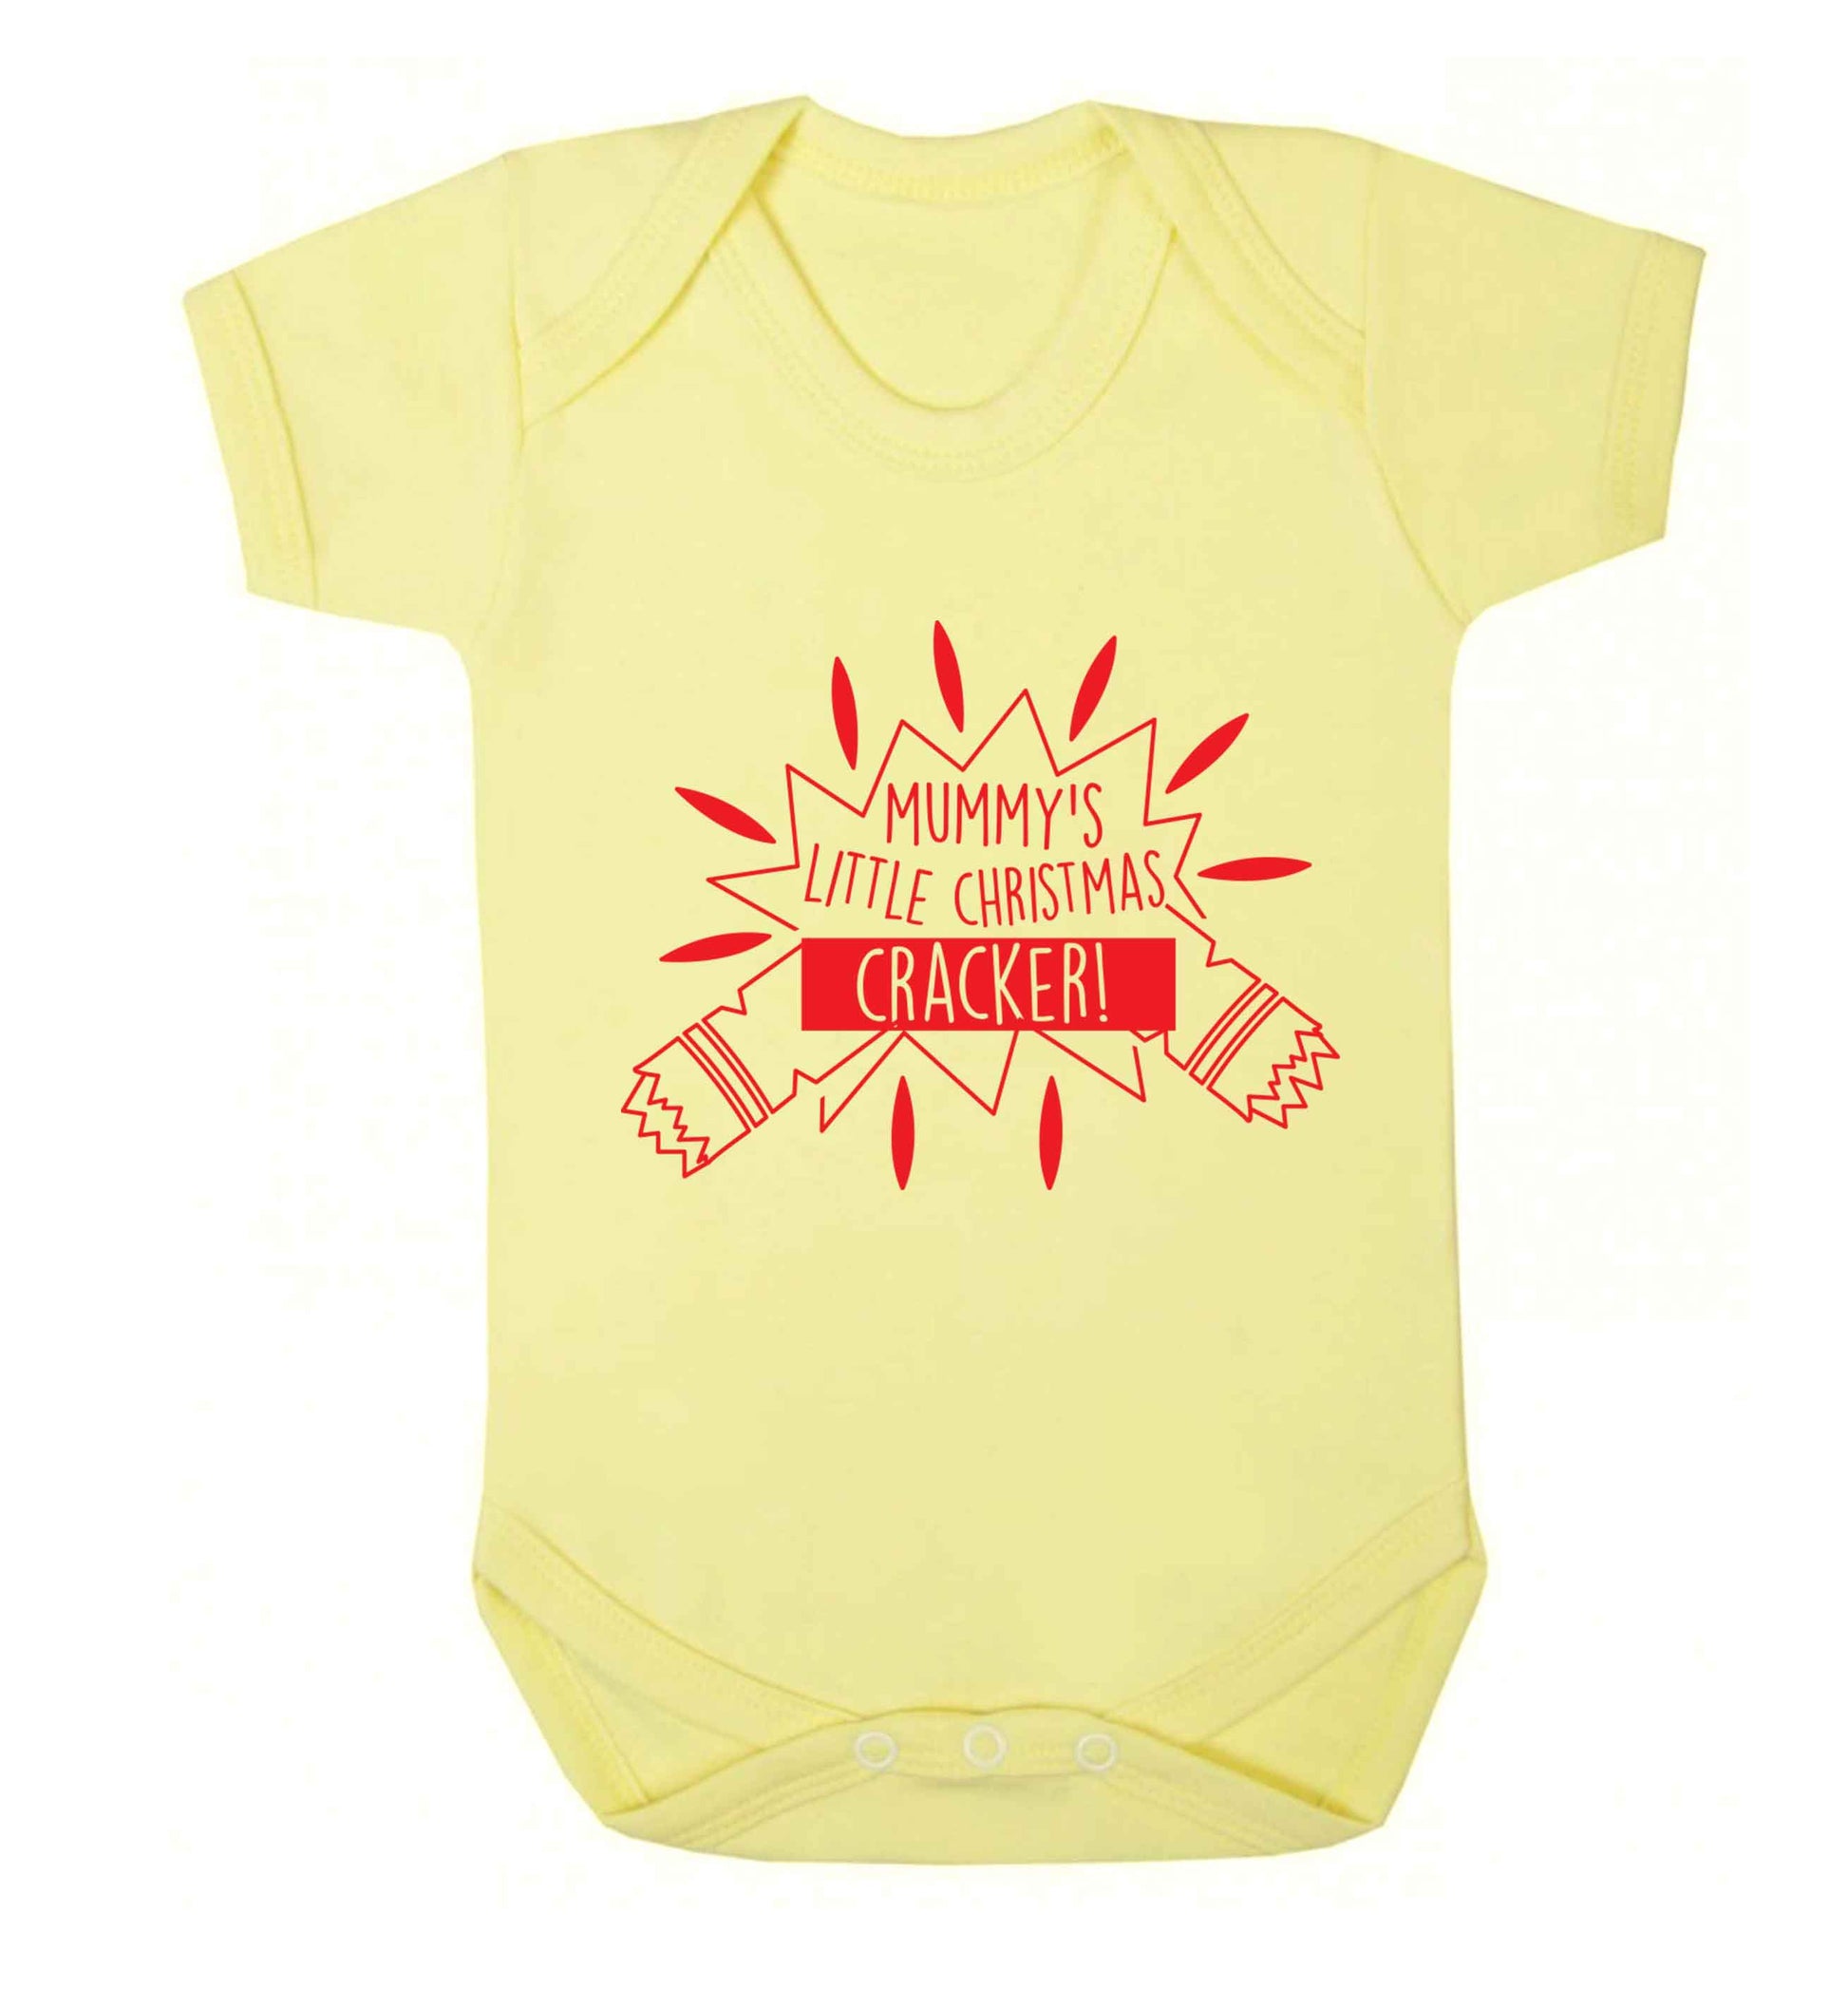 Mummy's little christmas cracker Baby Vest pale yellow 18-24 months